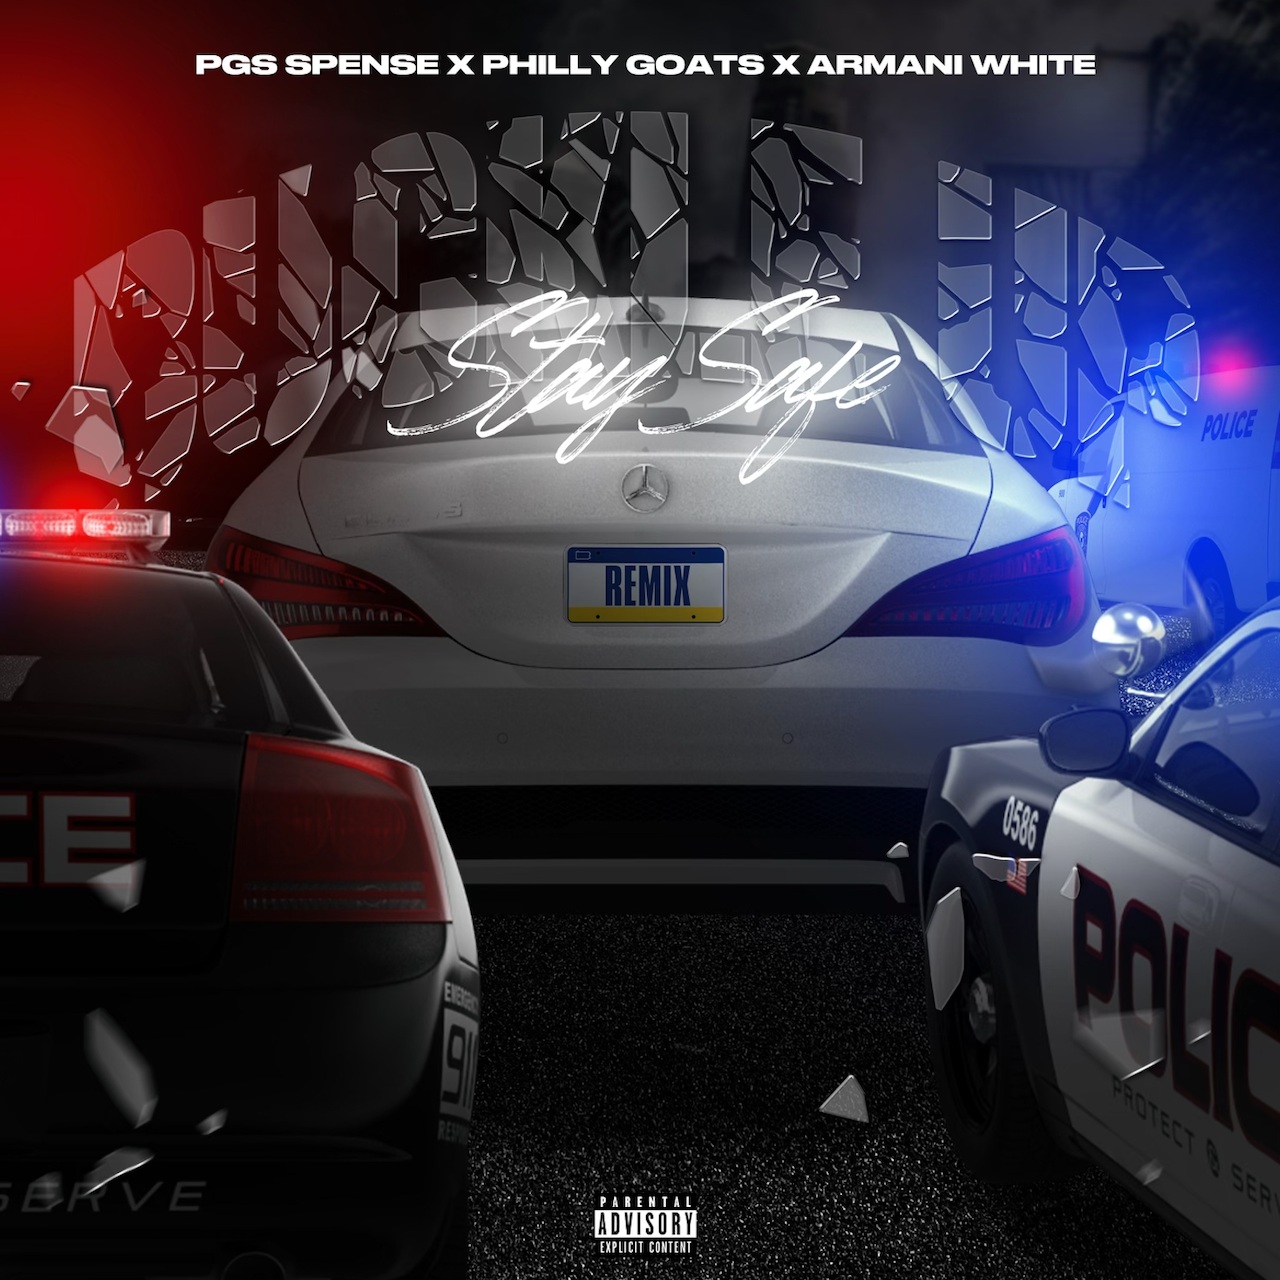 Armani White Joins Philly Goatsâ€™ PGS Spence For â€˜Buckle Up (Remix)â€™ #ArmaniWhite